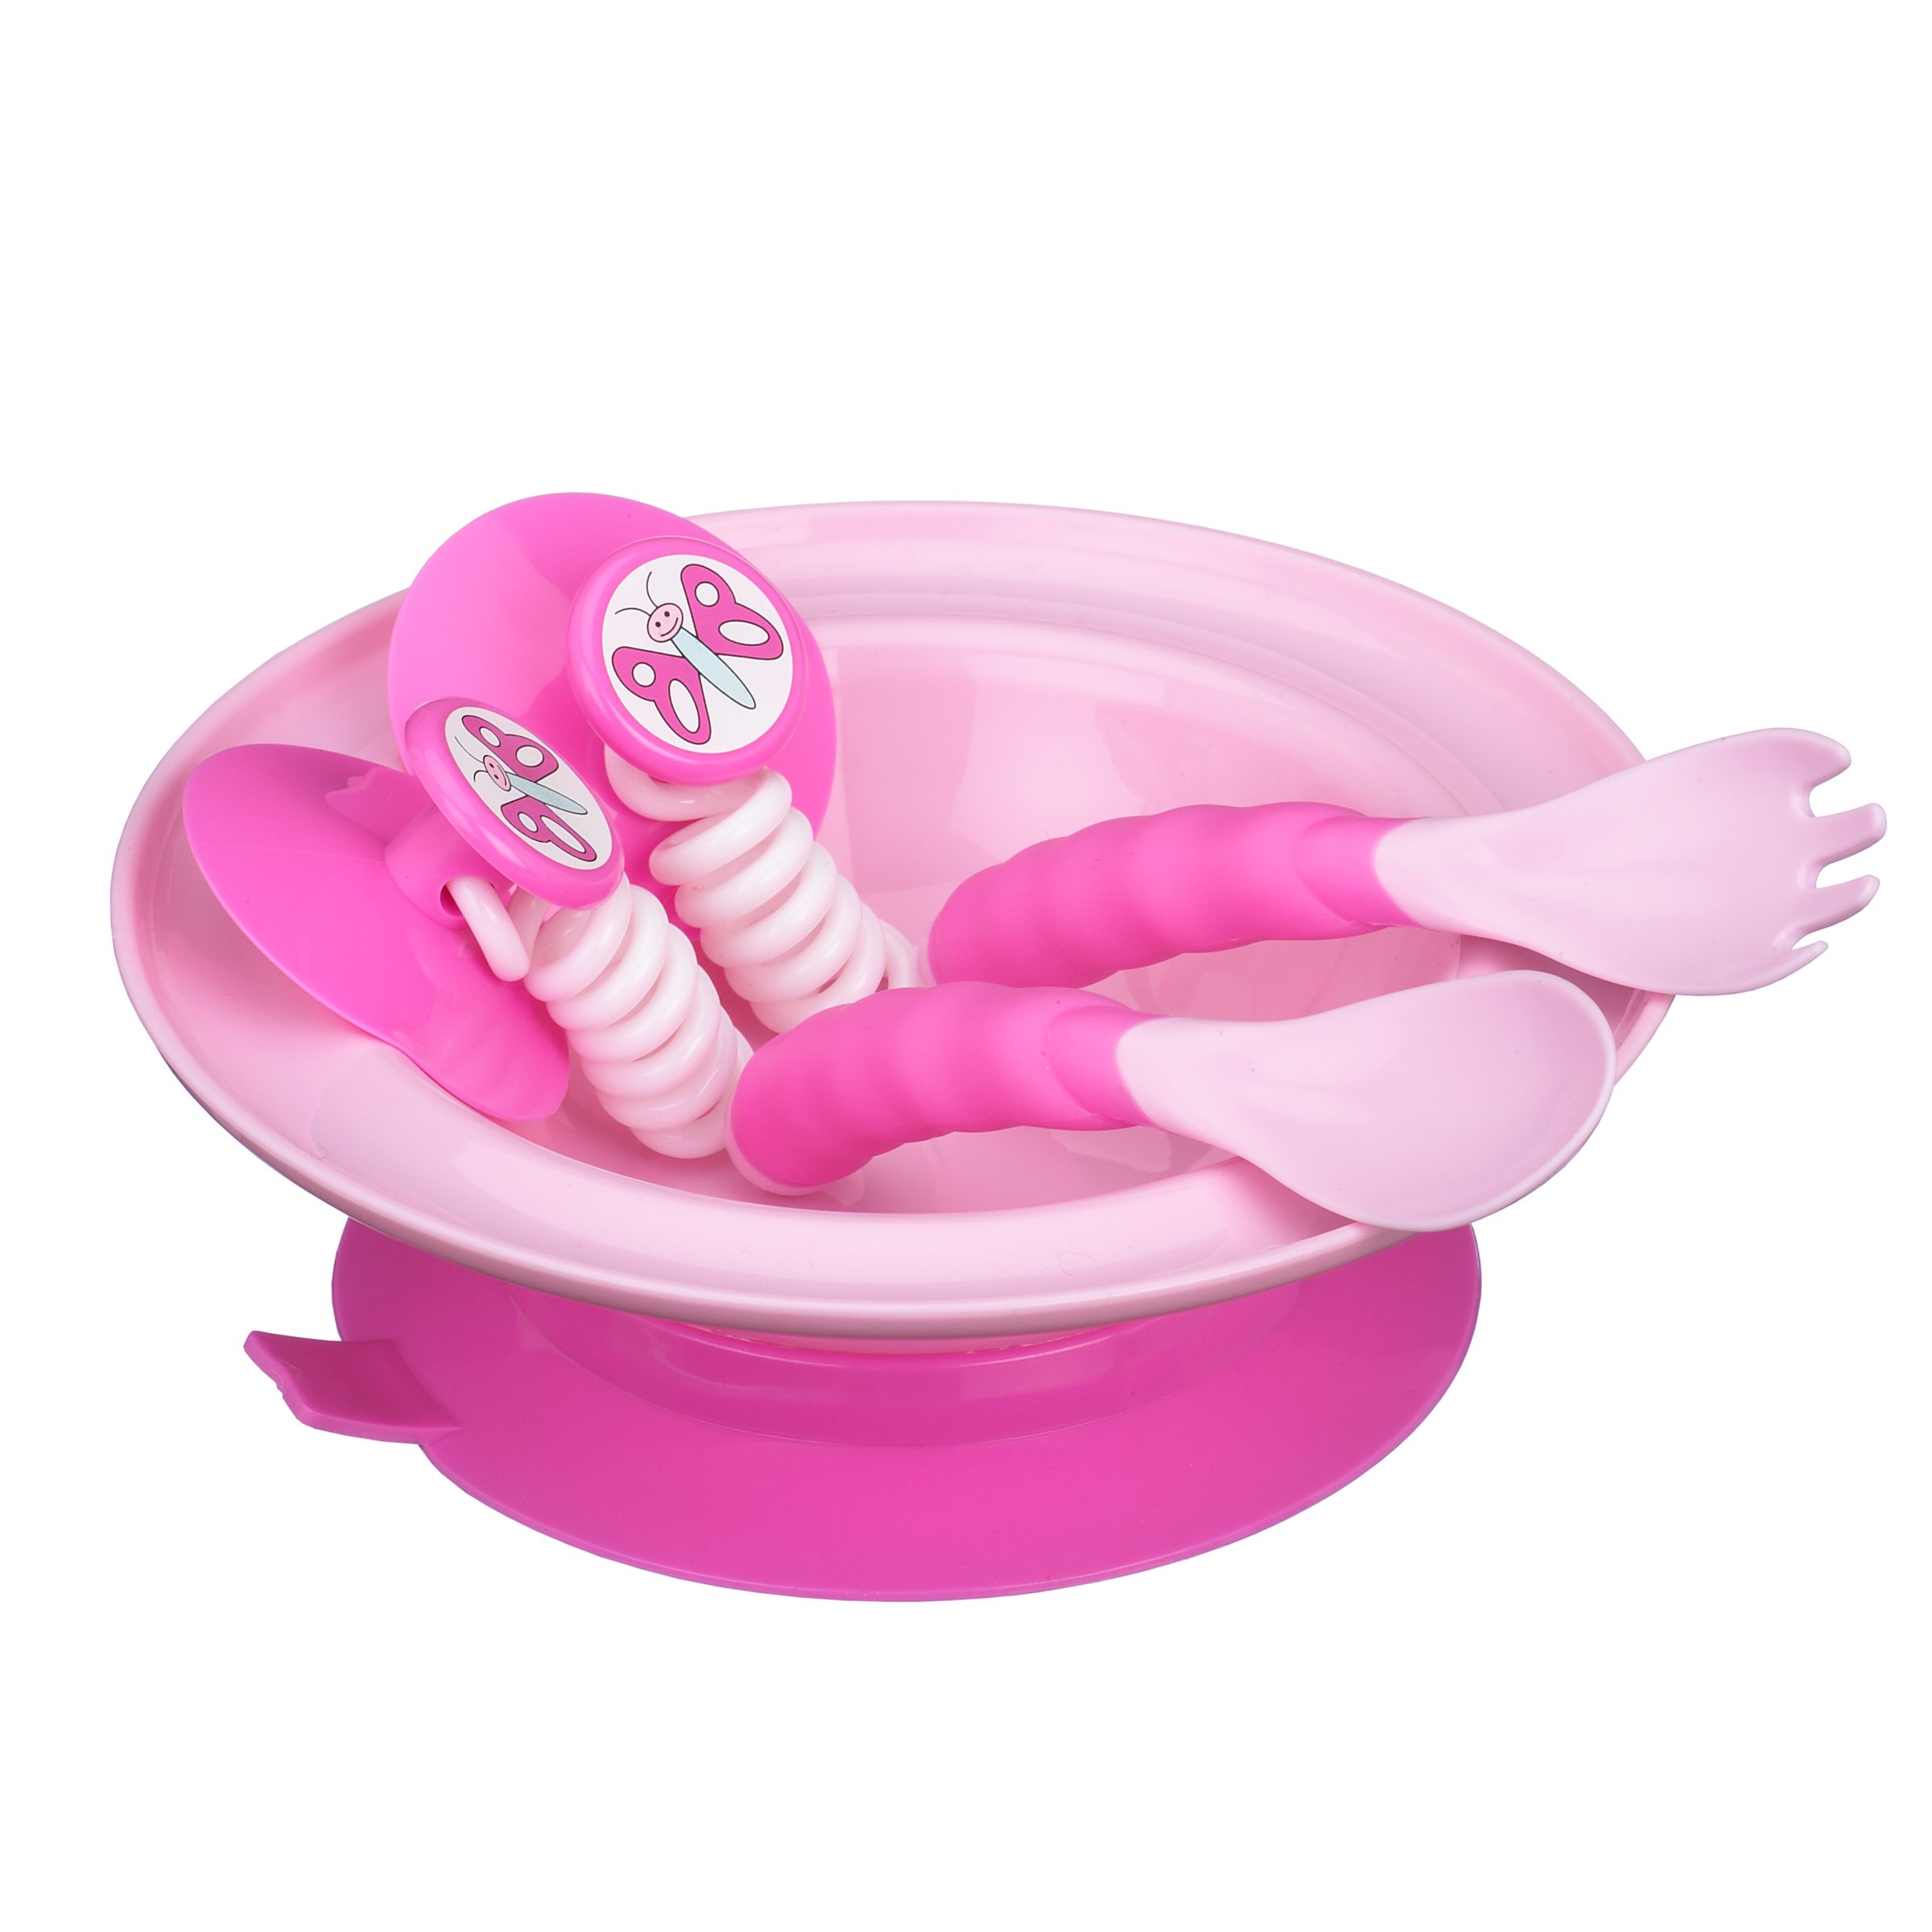 Bowl and Cutlery Set- Pink